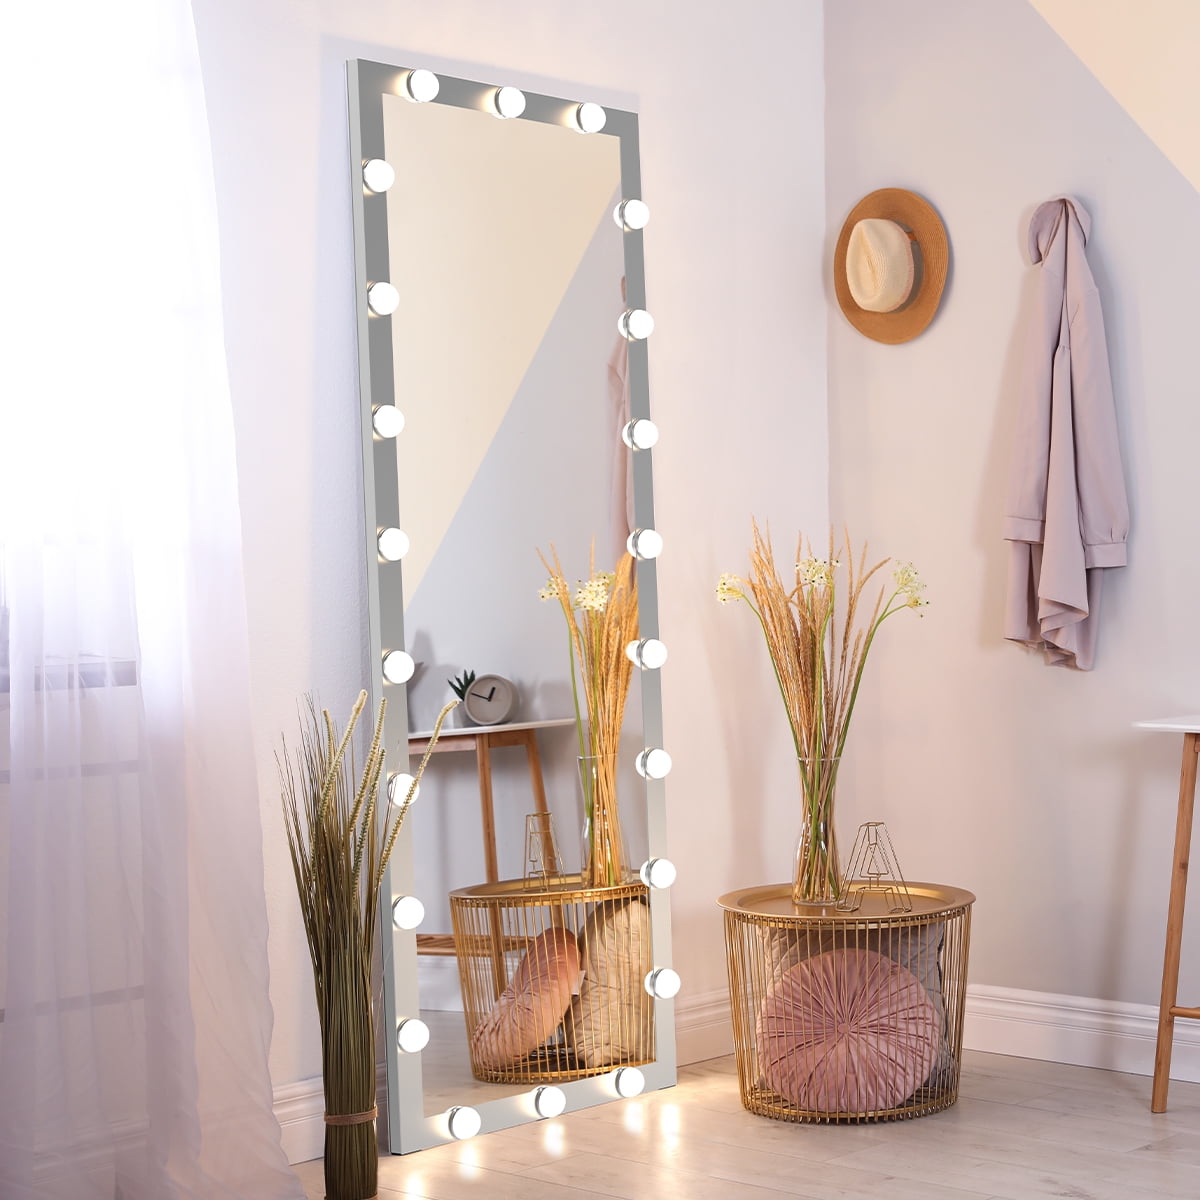 BEATUME Vanity Hollywood Mirror LED Vanity Mirror Full Length Mirror with Lights Floor Firror for Bedroom Length Mirrors Silver 63.00 * 24.00 * 1 inches - Walmart.com